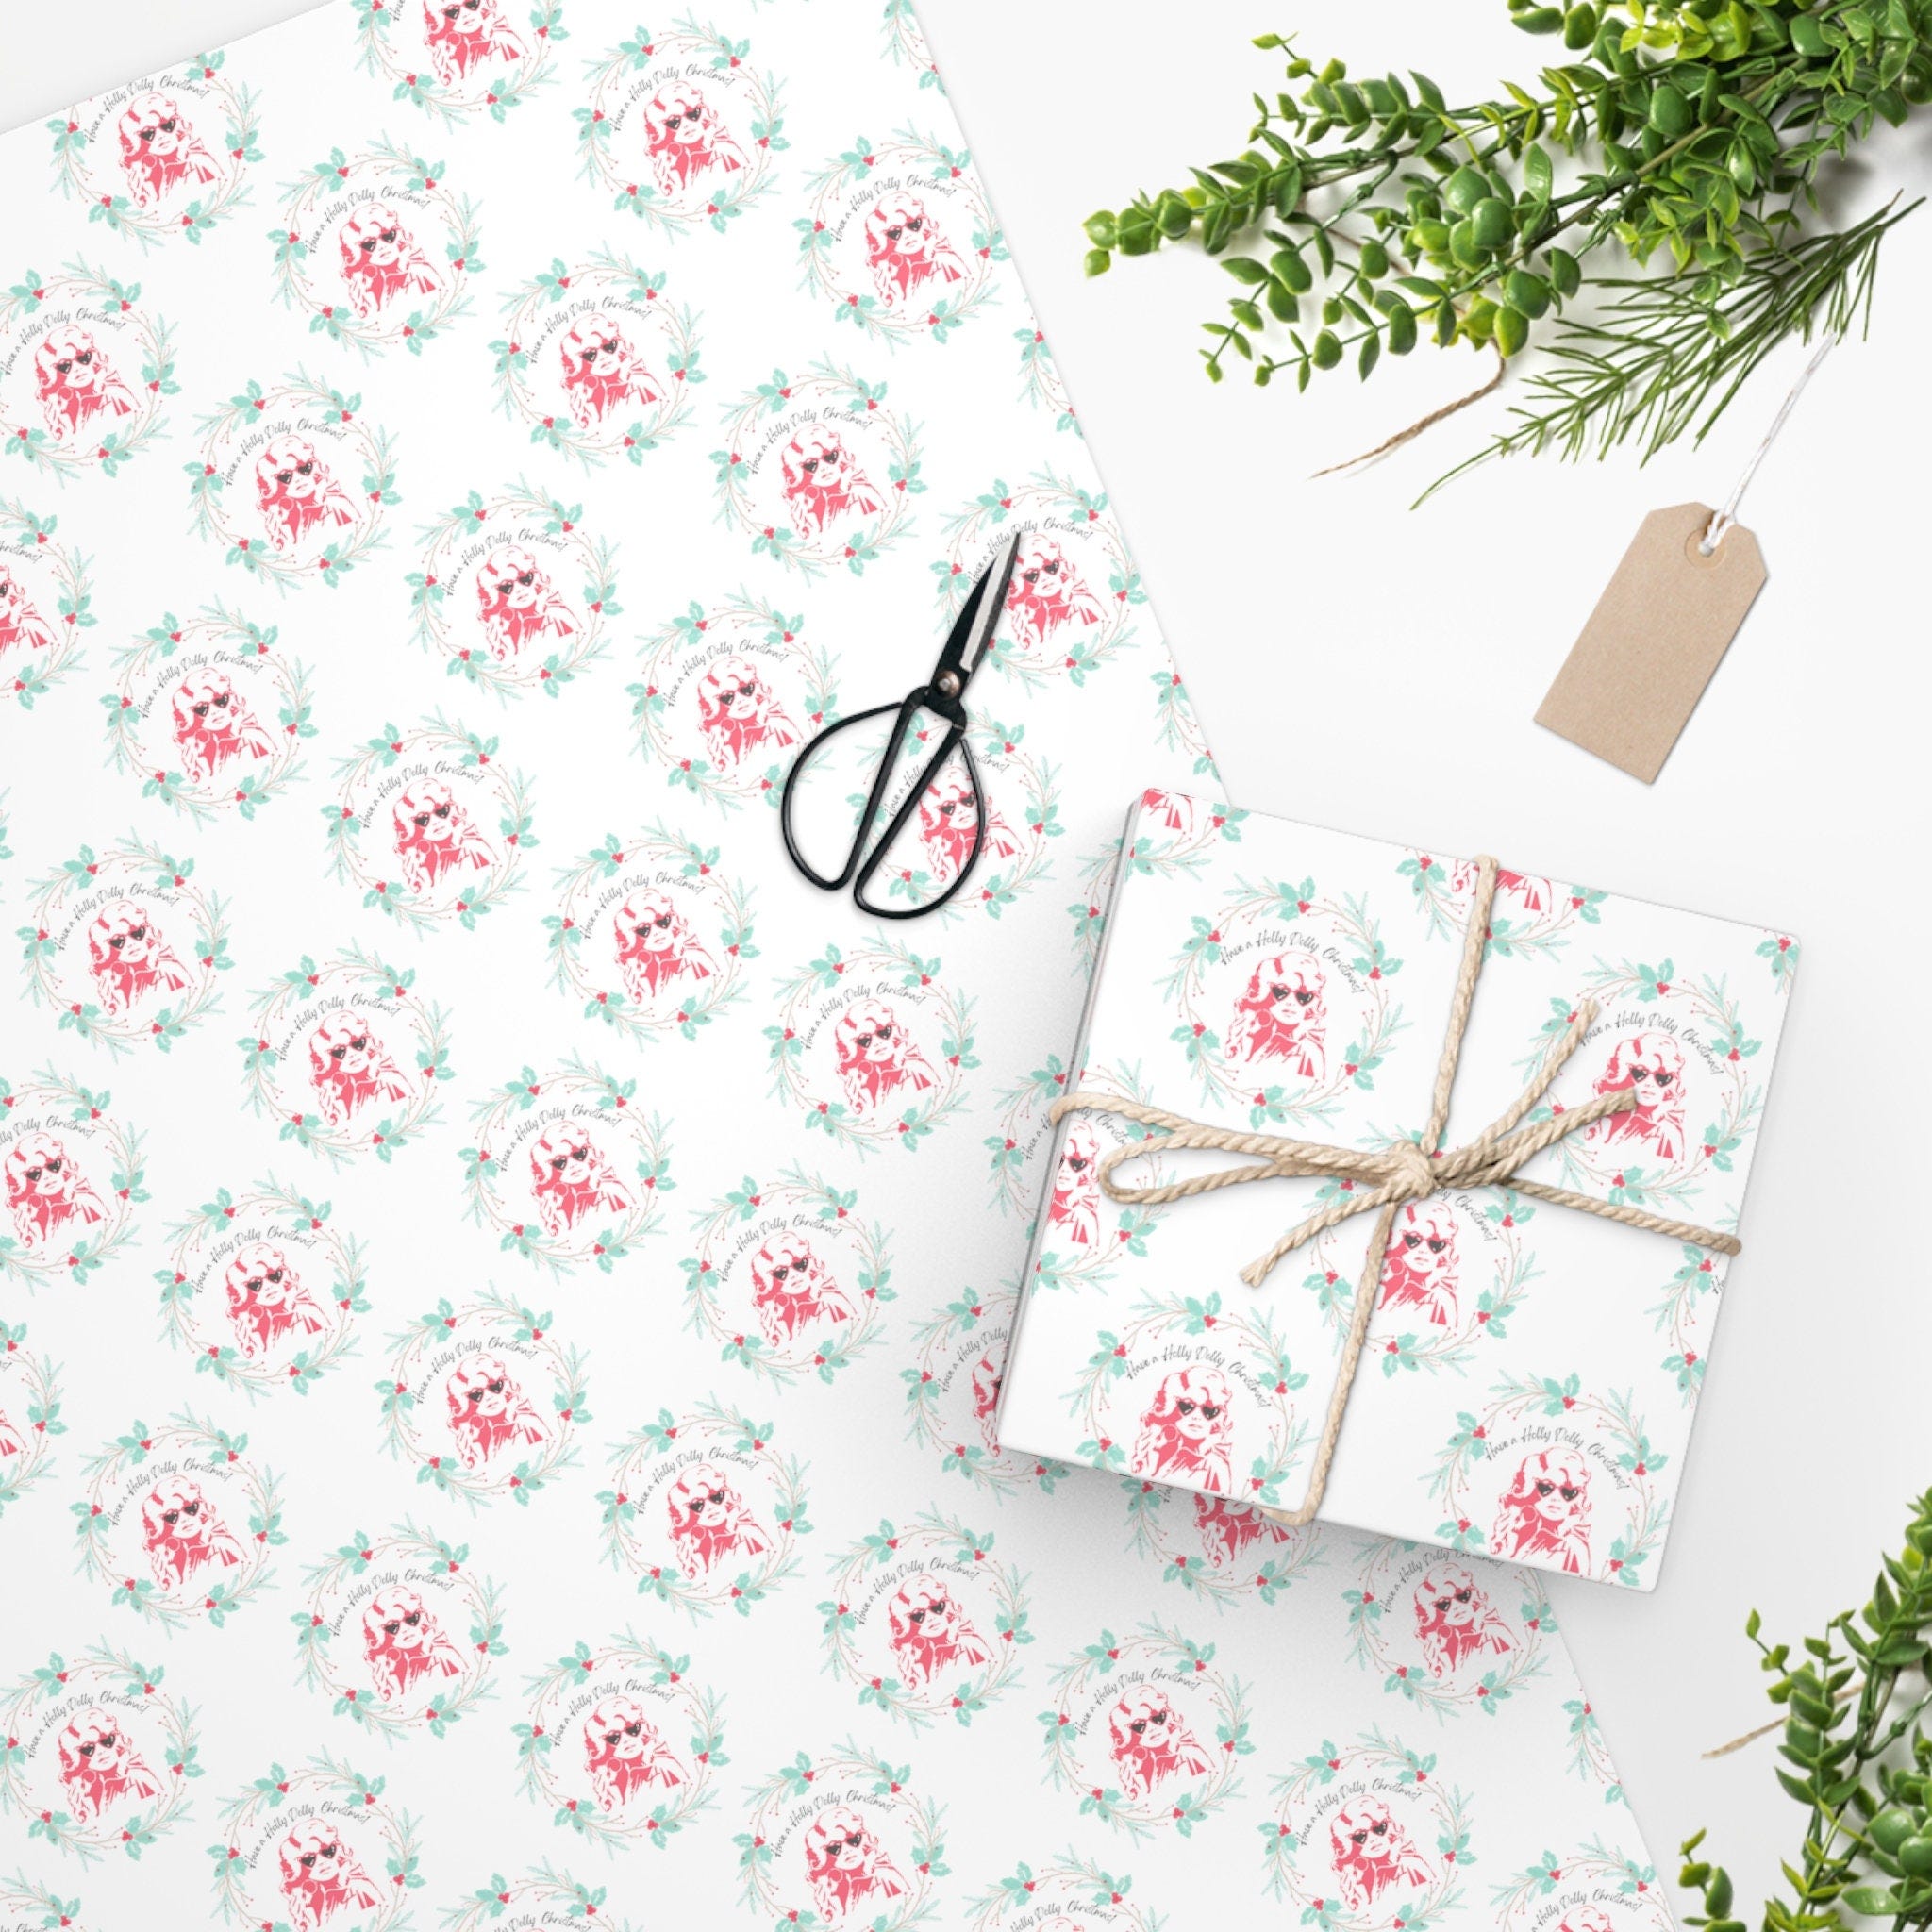 Dolly Parton inspired wrapping paper, have a holly dolly Christmas gift wrap, country western Christmas wrap, coastal cowgirl gifting wrap